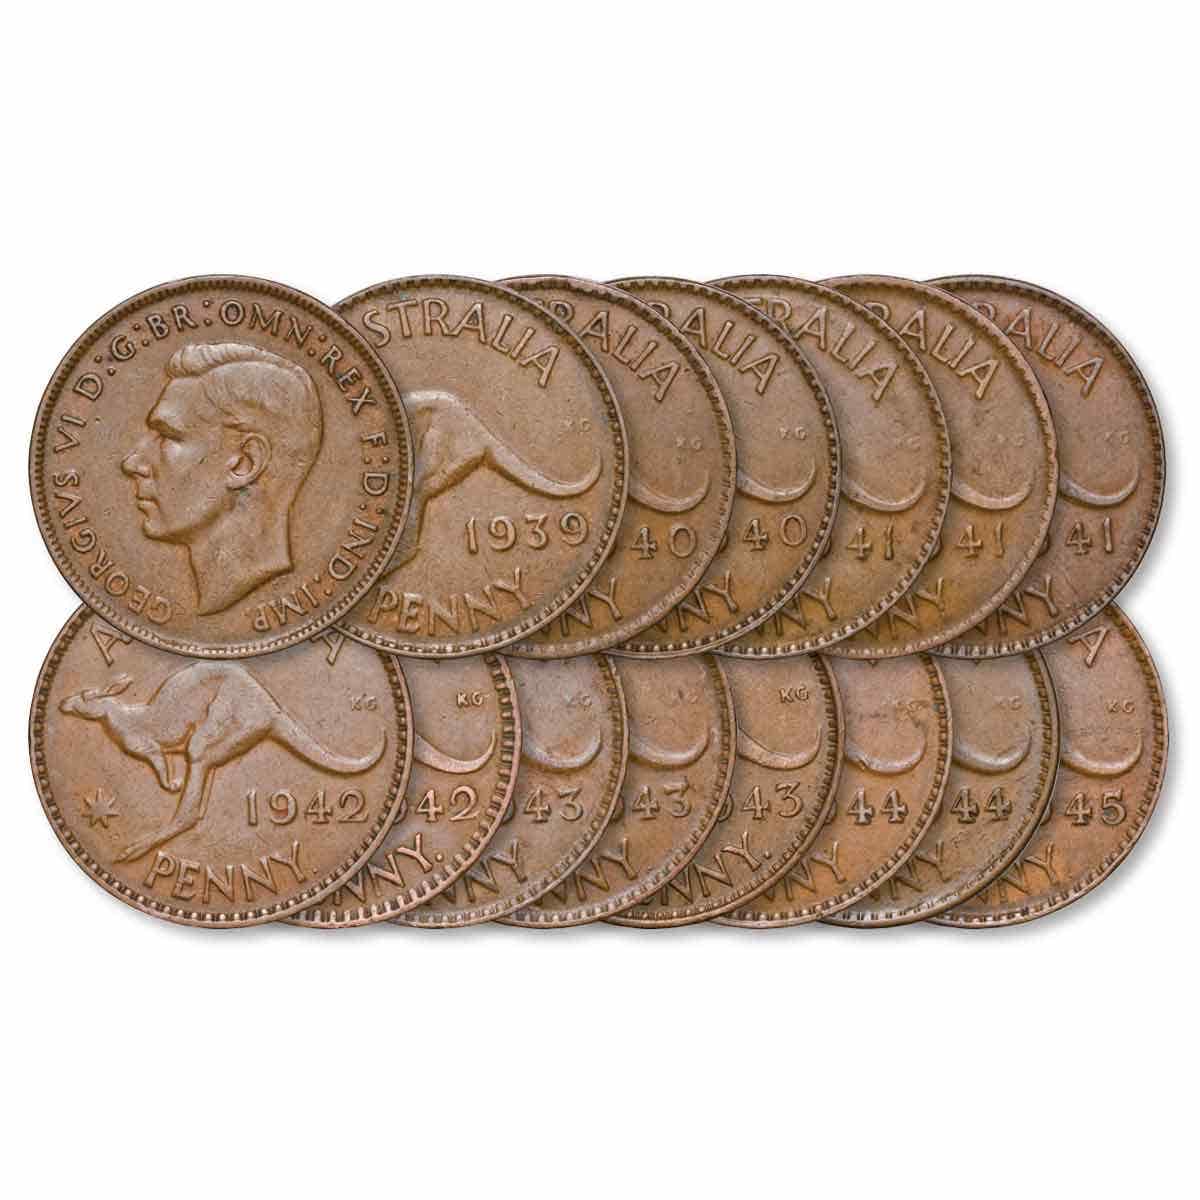 1939-45 Penny Complete 14-Coin Set Fine - Very Fine